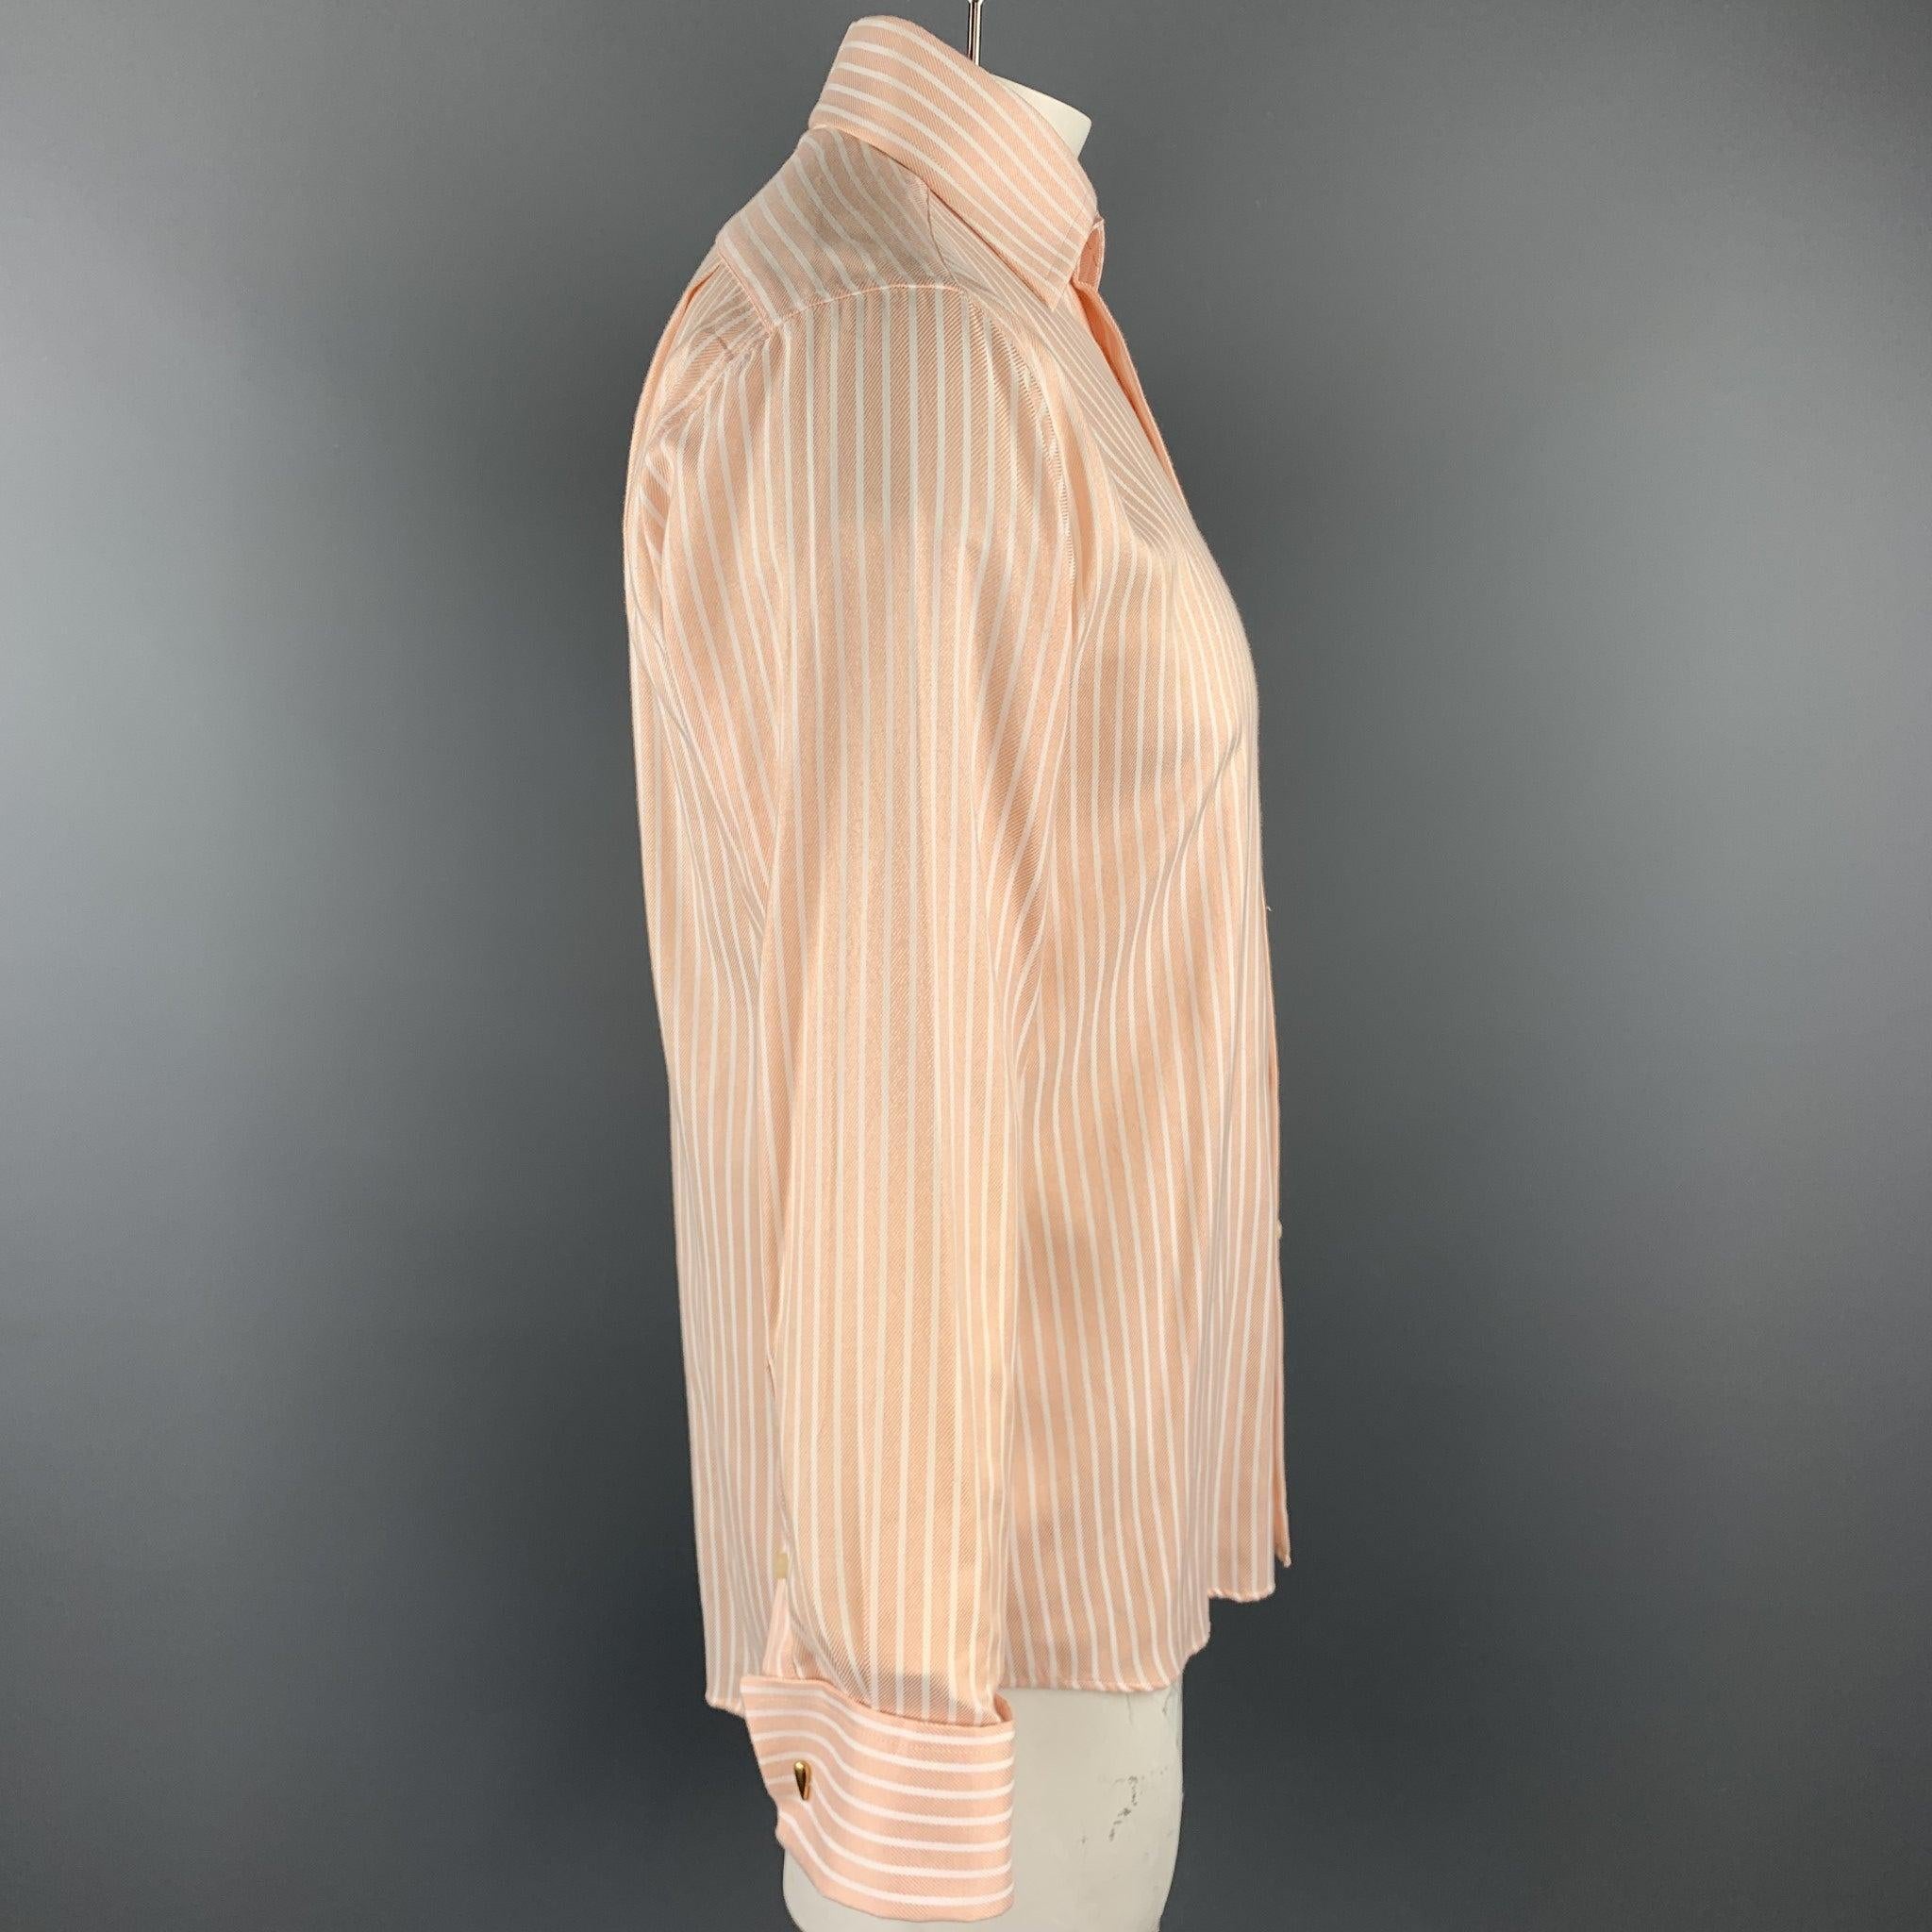 PAUL SMITH long sleeve shirt comes in a peach cotton with white stripes featuring a button up style, cuff link sleeves, and a spread collar. Cuff links not included.
Very Good
Pre-Owned Condition. 

Marked:   16.5/33-34 

Measurements: 
 
Shoulder: